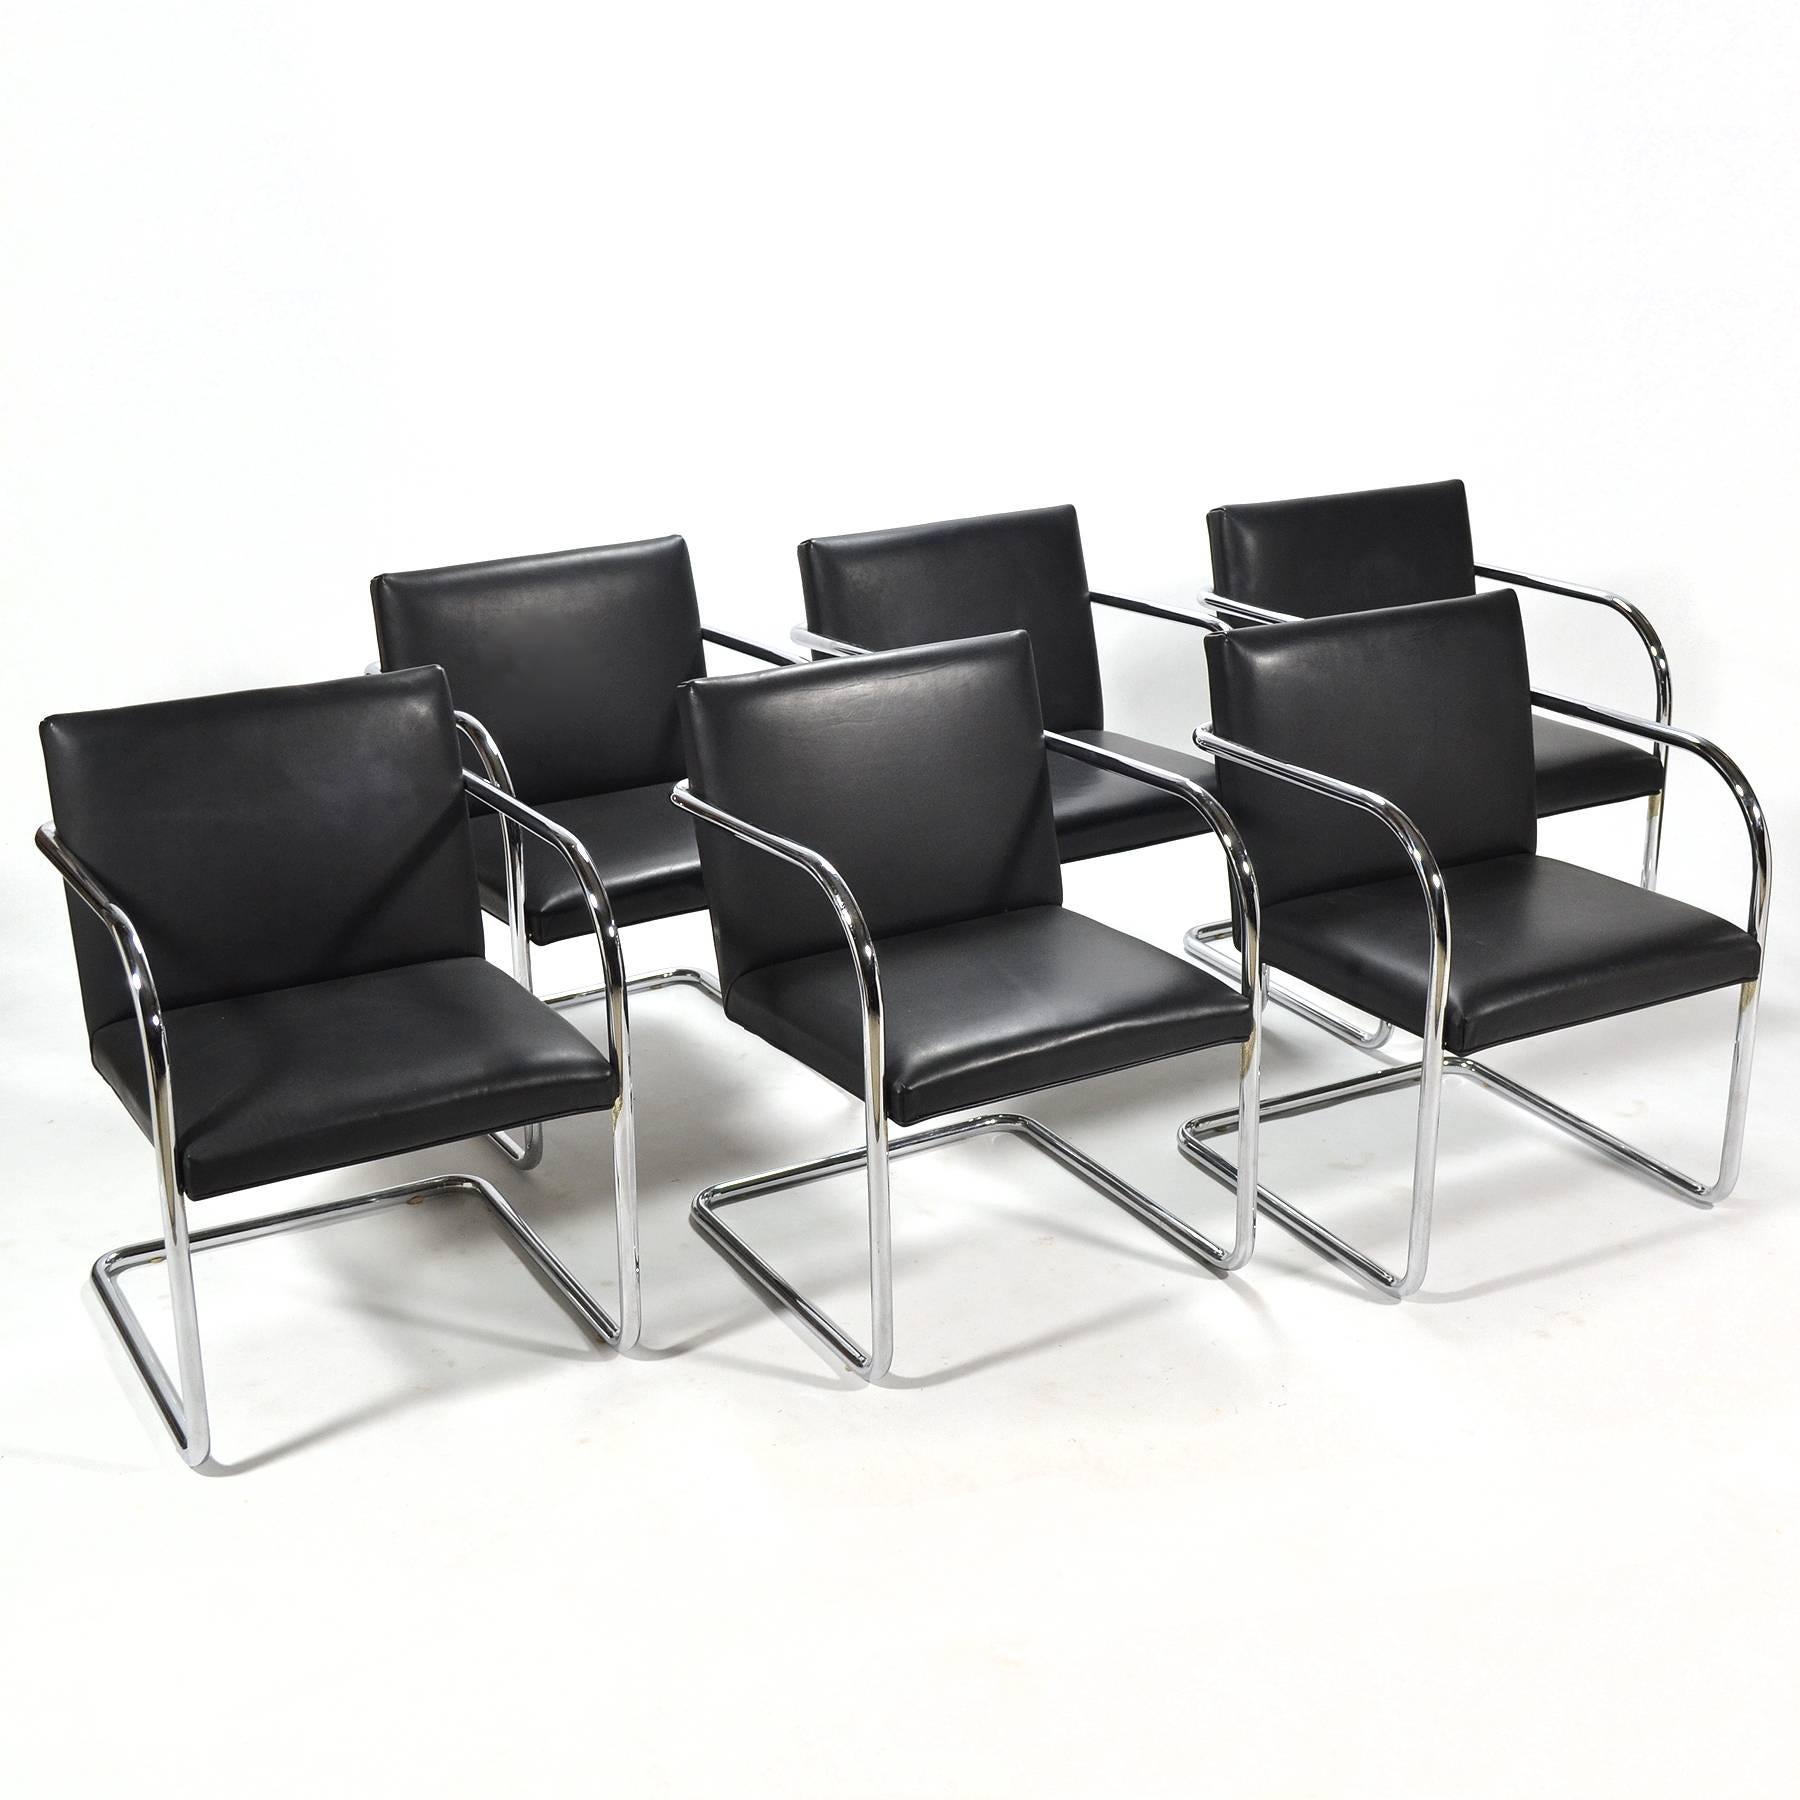 This nice set of six Mies Brno chairs are well made examples of the Classic design. True to Mies' Minimalist ideal, they have a spare cantilevered steel frame which supports the clean-lined upholstered seat and back. Like an armchair version of a